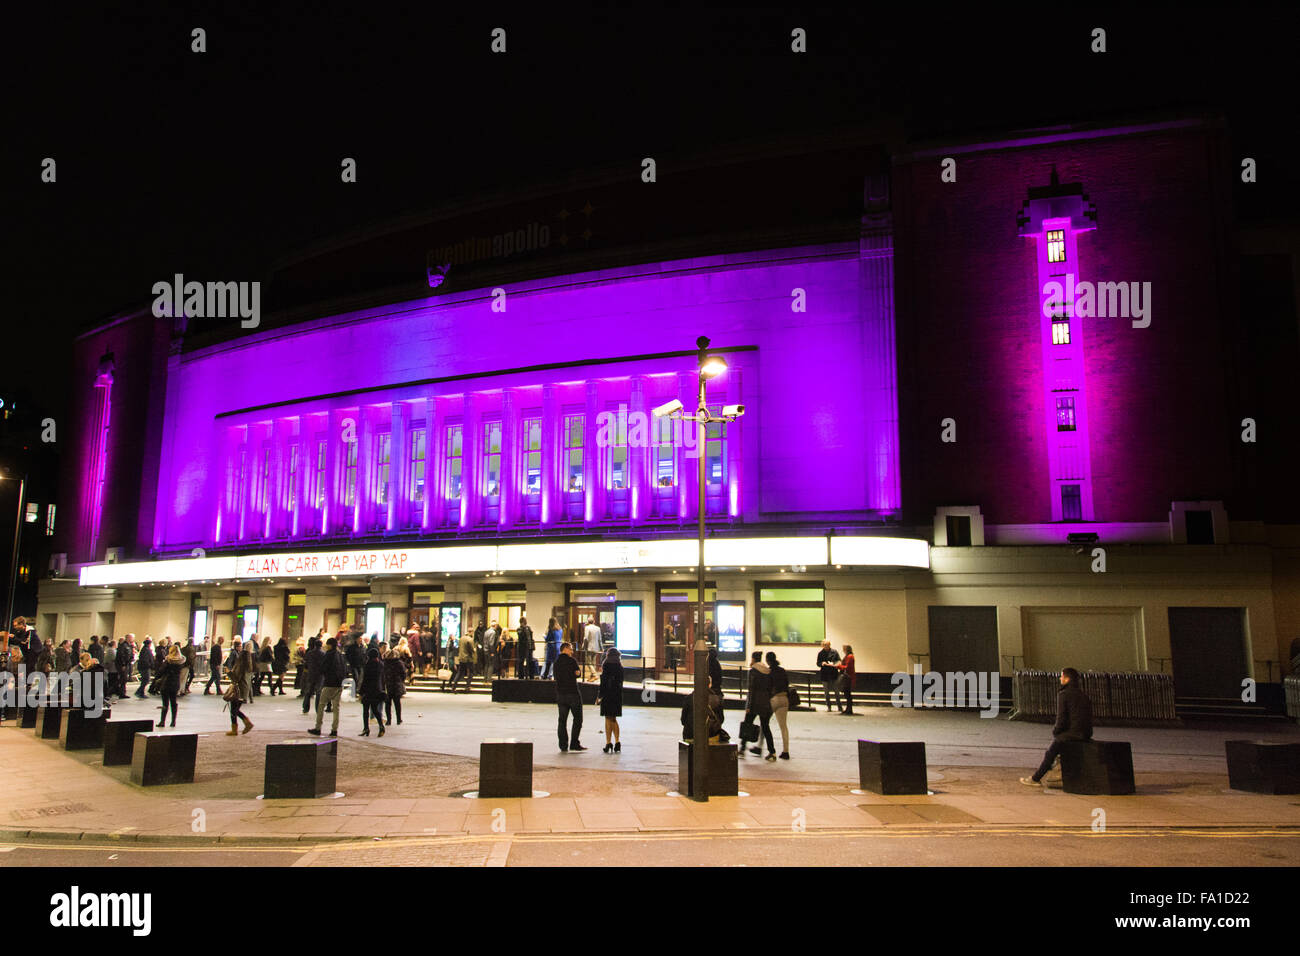 People queuing for an Alan Carr show outside the Hammersmith Eventim-Apollo, Hammersmith, London, England, UK Stock Photo